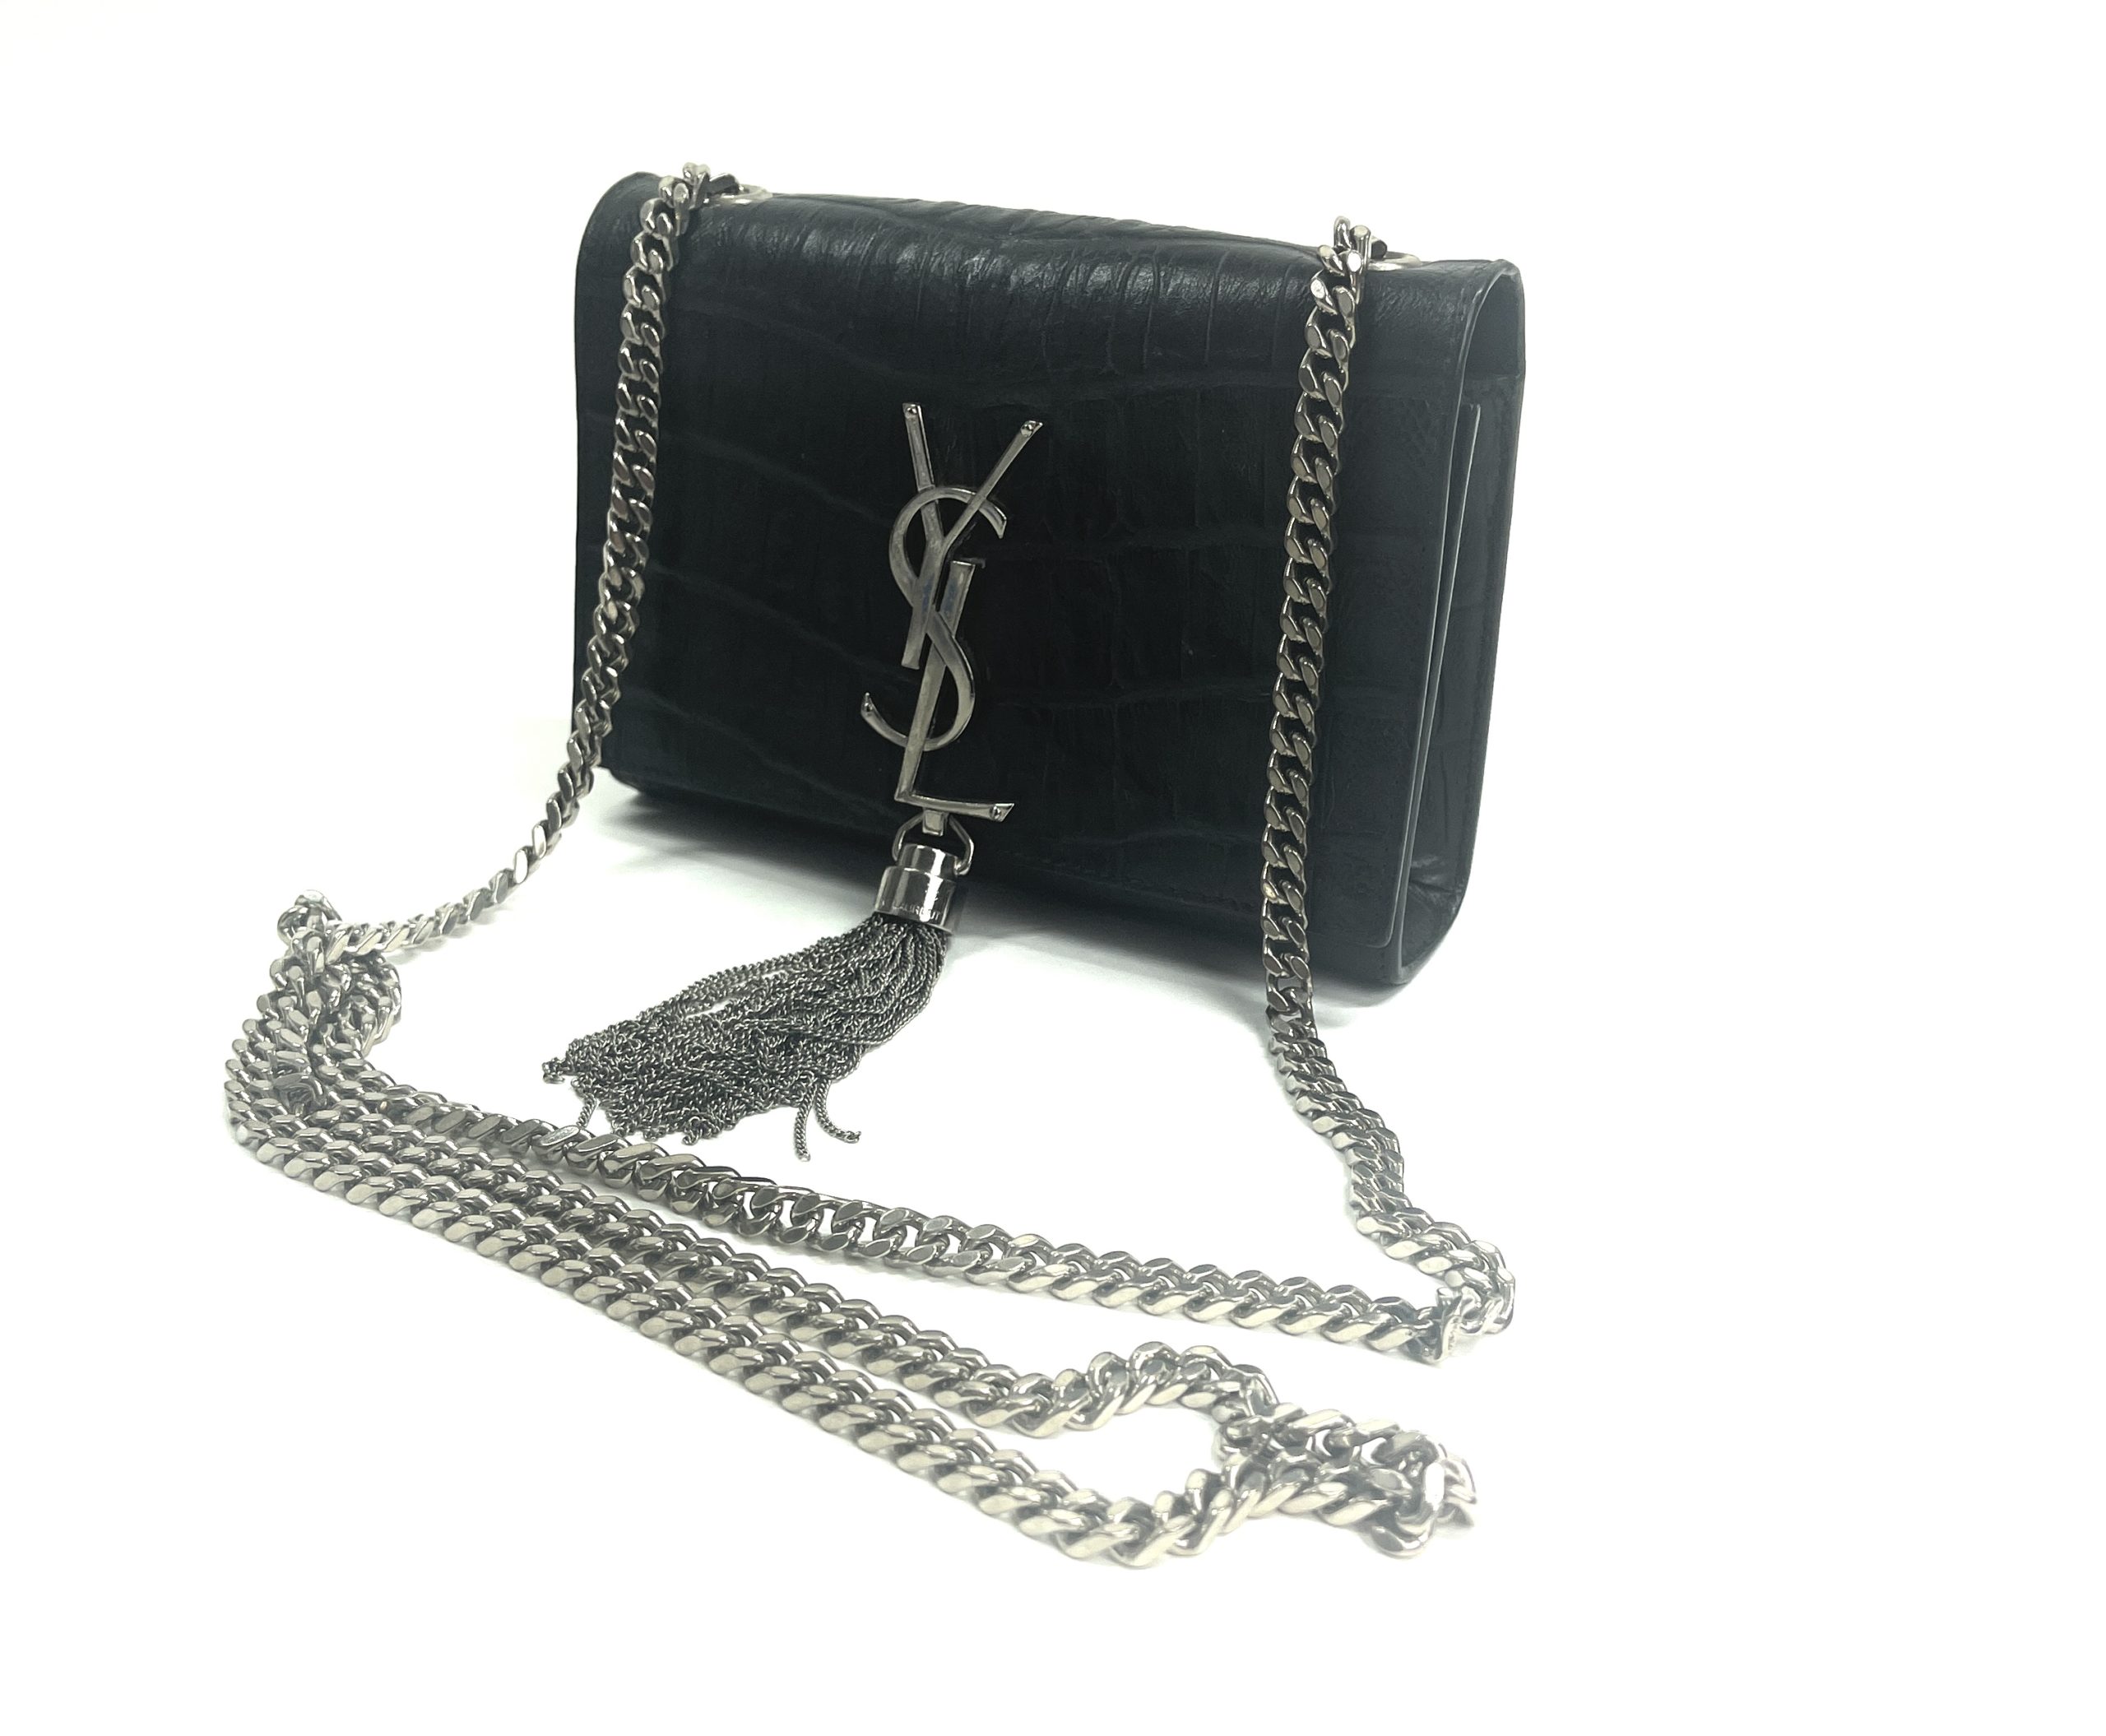 NWT Saint Laurent YSL Monogram Small Kate Chain Bag Black Suede Embroidered